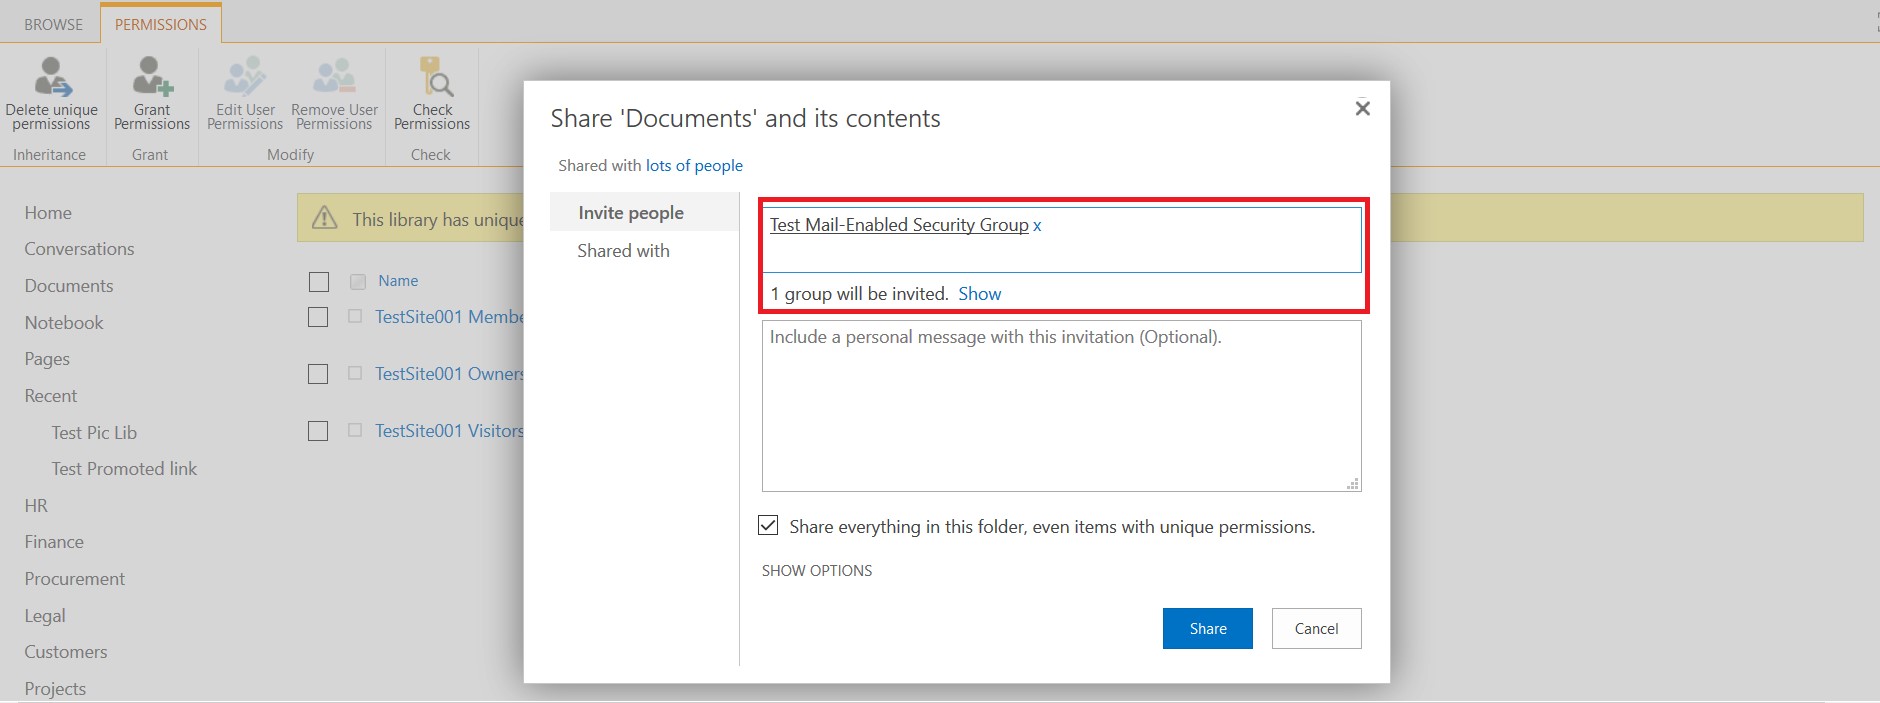 Mail-enabled security group in SharePoint Online - Security groups in office 365